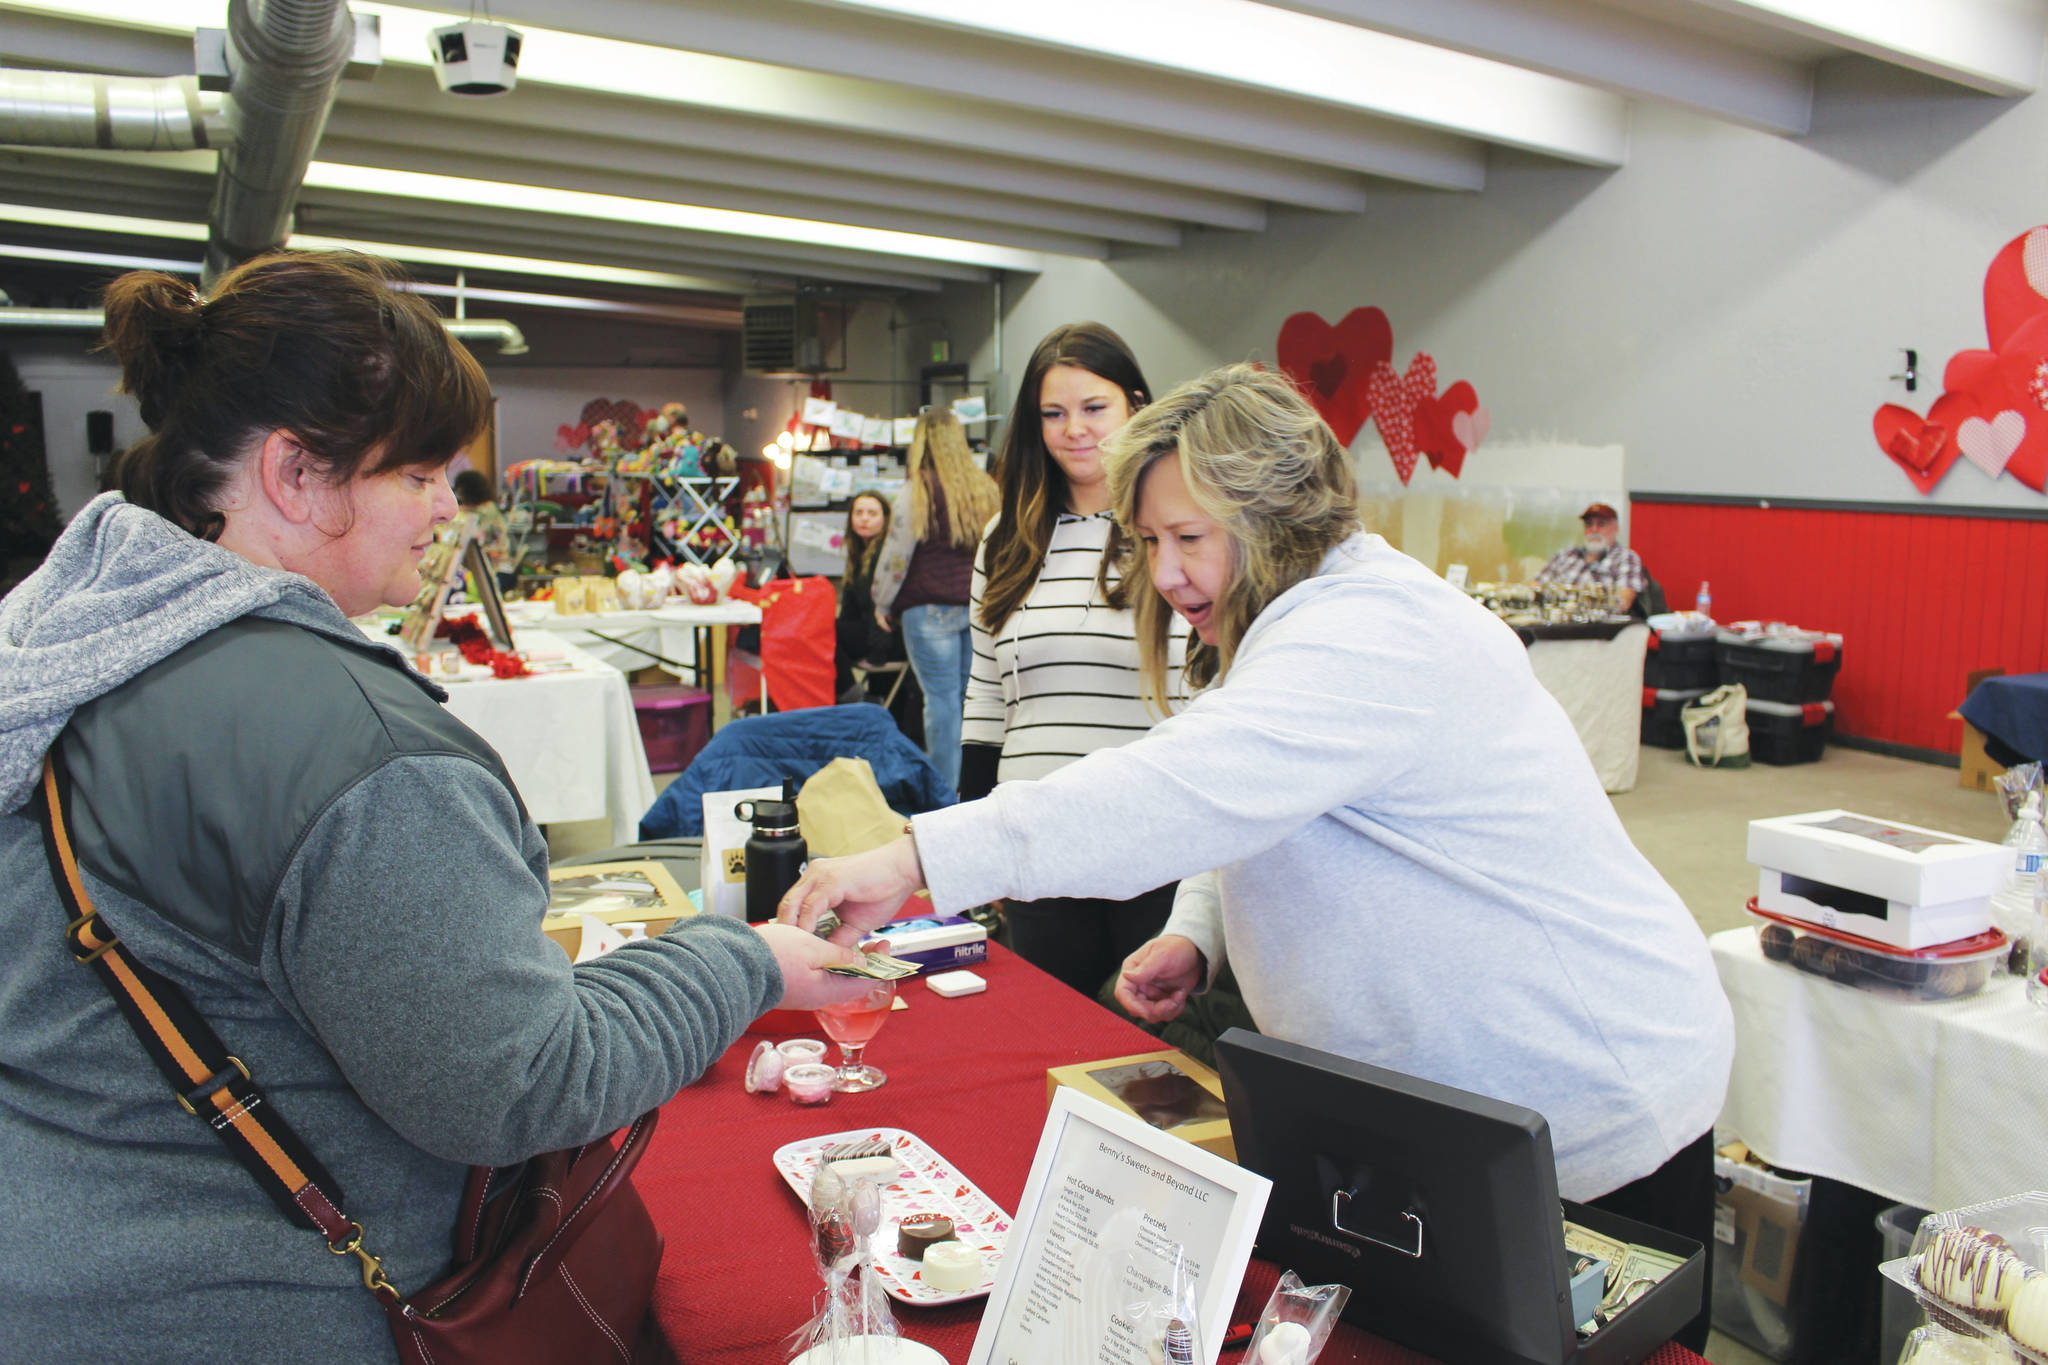 Photo by Brian Mazurek/Peninsula Clarion 
Robin Hahn, left, of Soldotna buys some hot cocoa bombs from Sherian Soares, right, and Ashley Soares, center, owners of Benny’s Sweets and Beyond, at a Valentine’s Bazaar in Soldotna on Saturday.